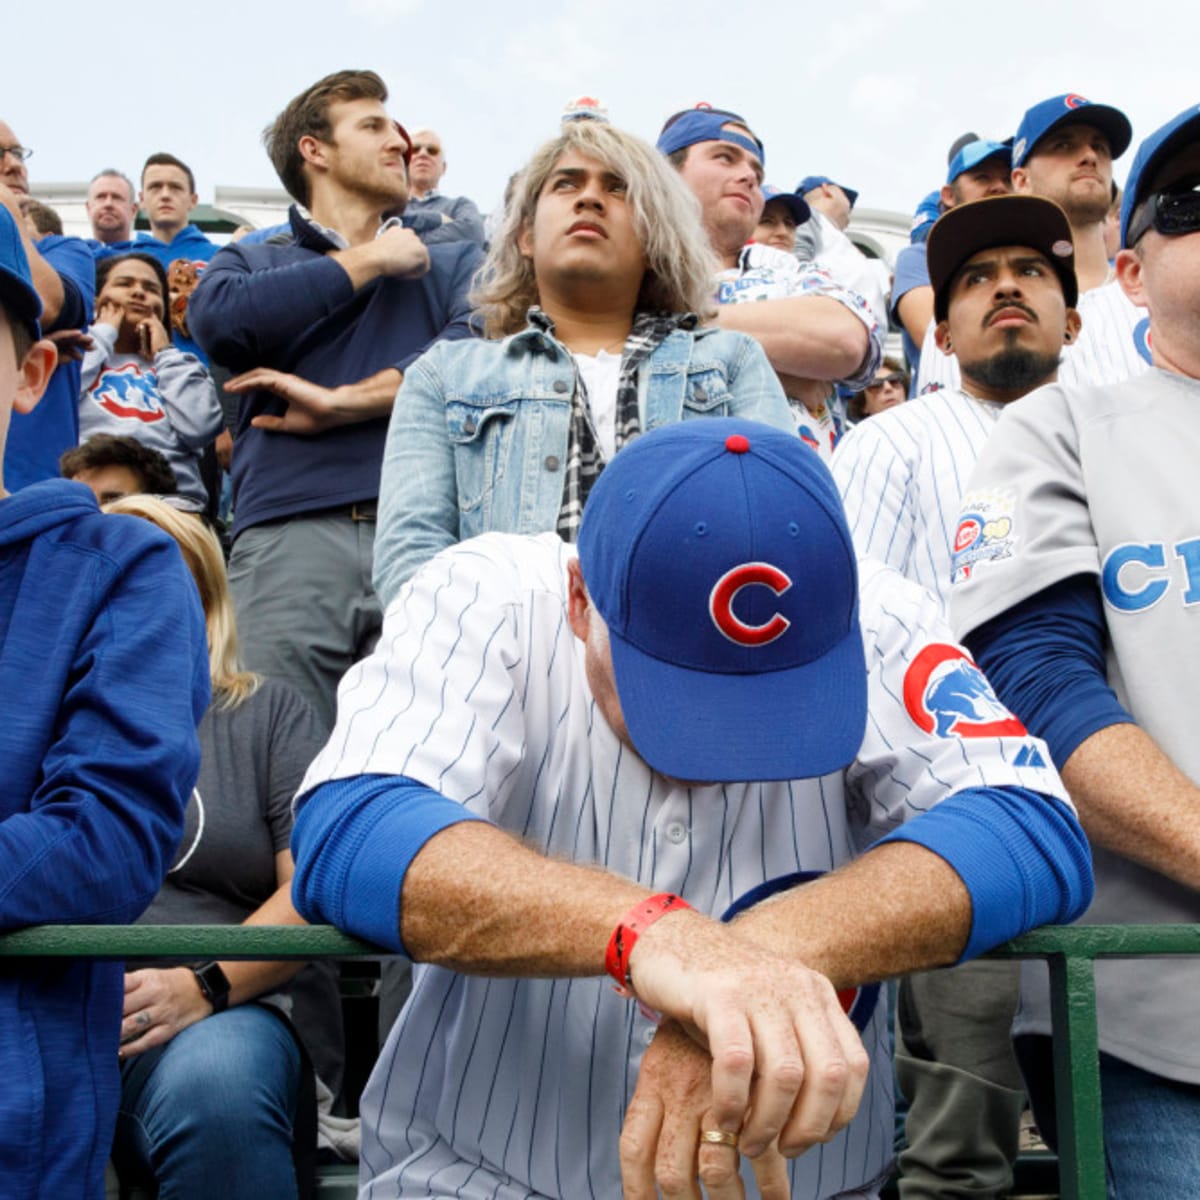 Cubs fan apology letter: Writes 1,000-word letter to Brewers fans - Sports  Illustrated